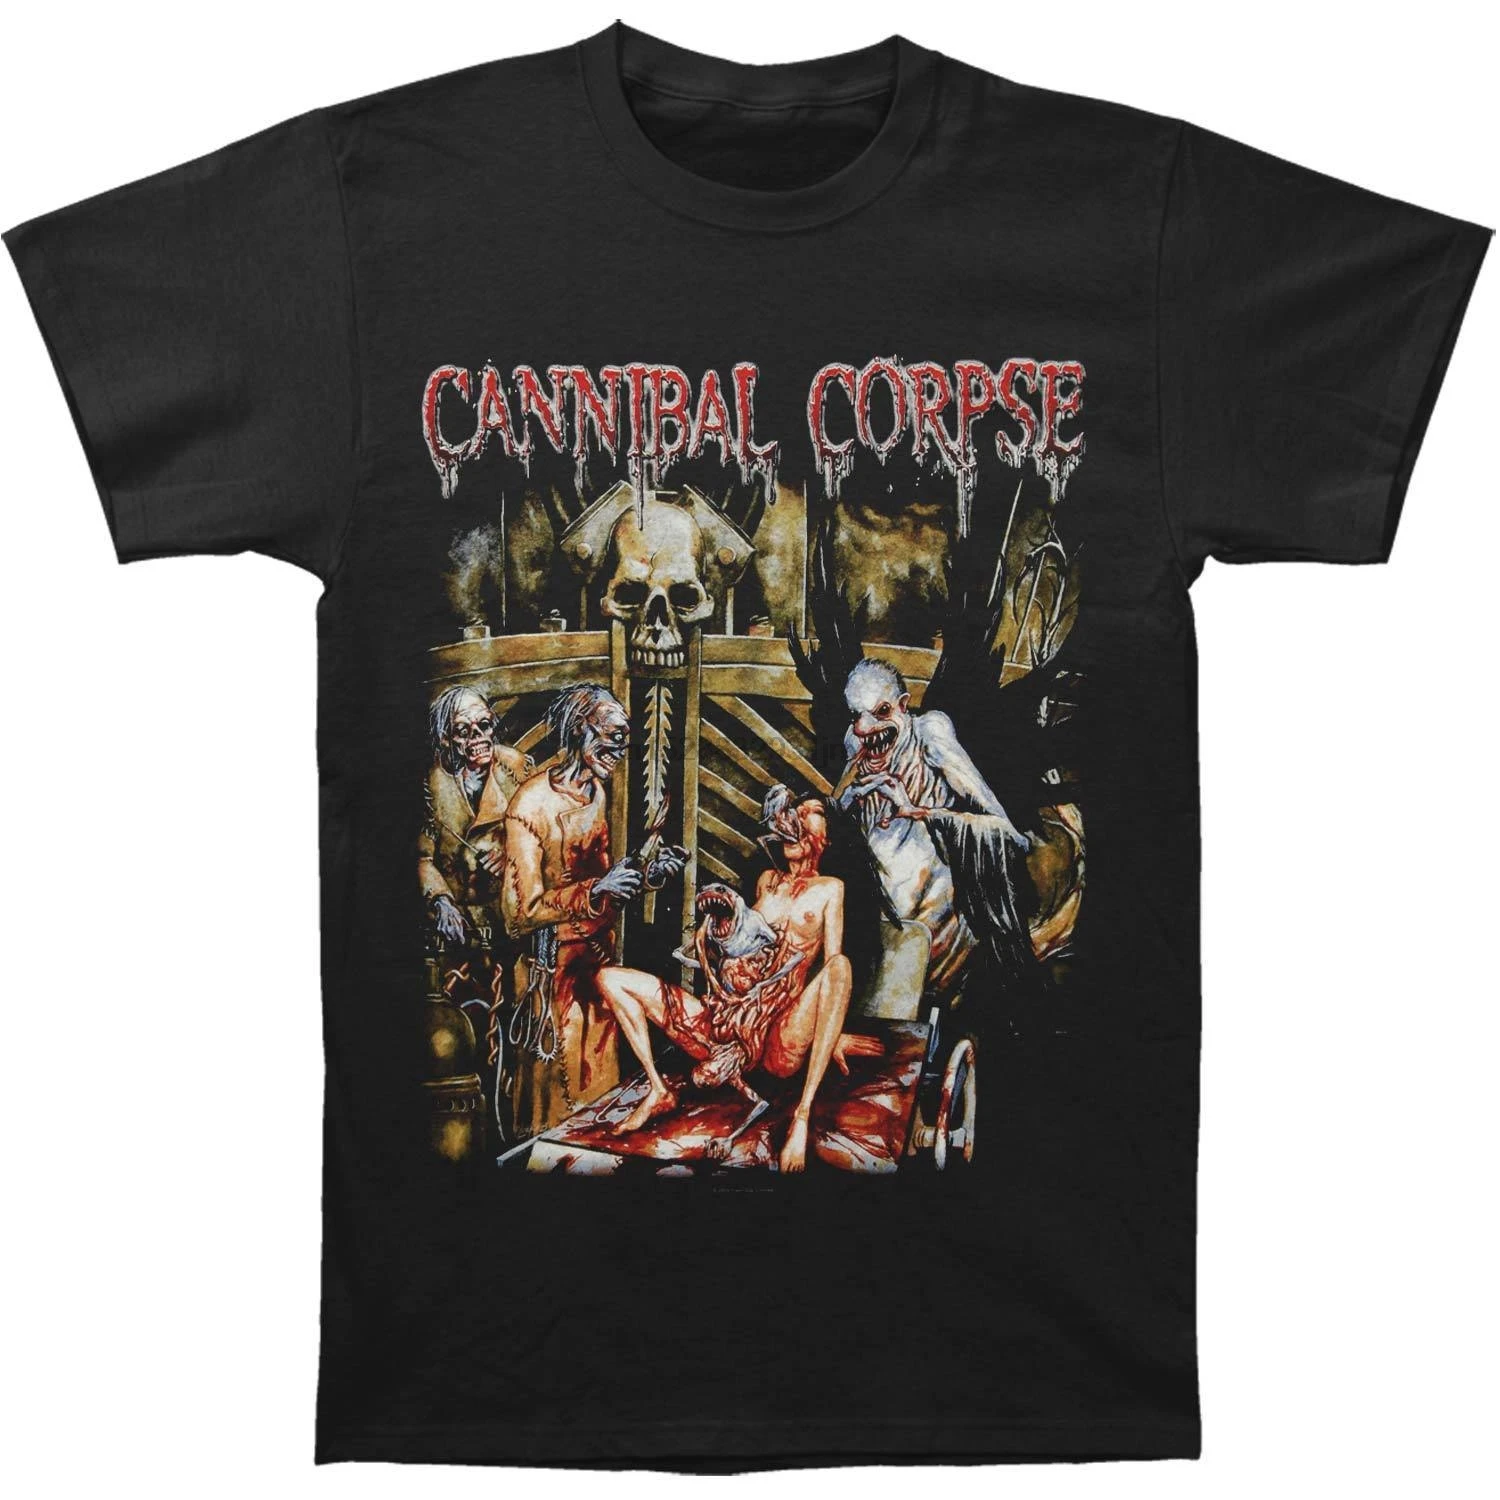 Cannibal Corpse Men The Wretched Spawn T-shirt Black Printed Men T-Shirt Short Sleeve Funny Tee Shirts